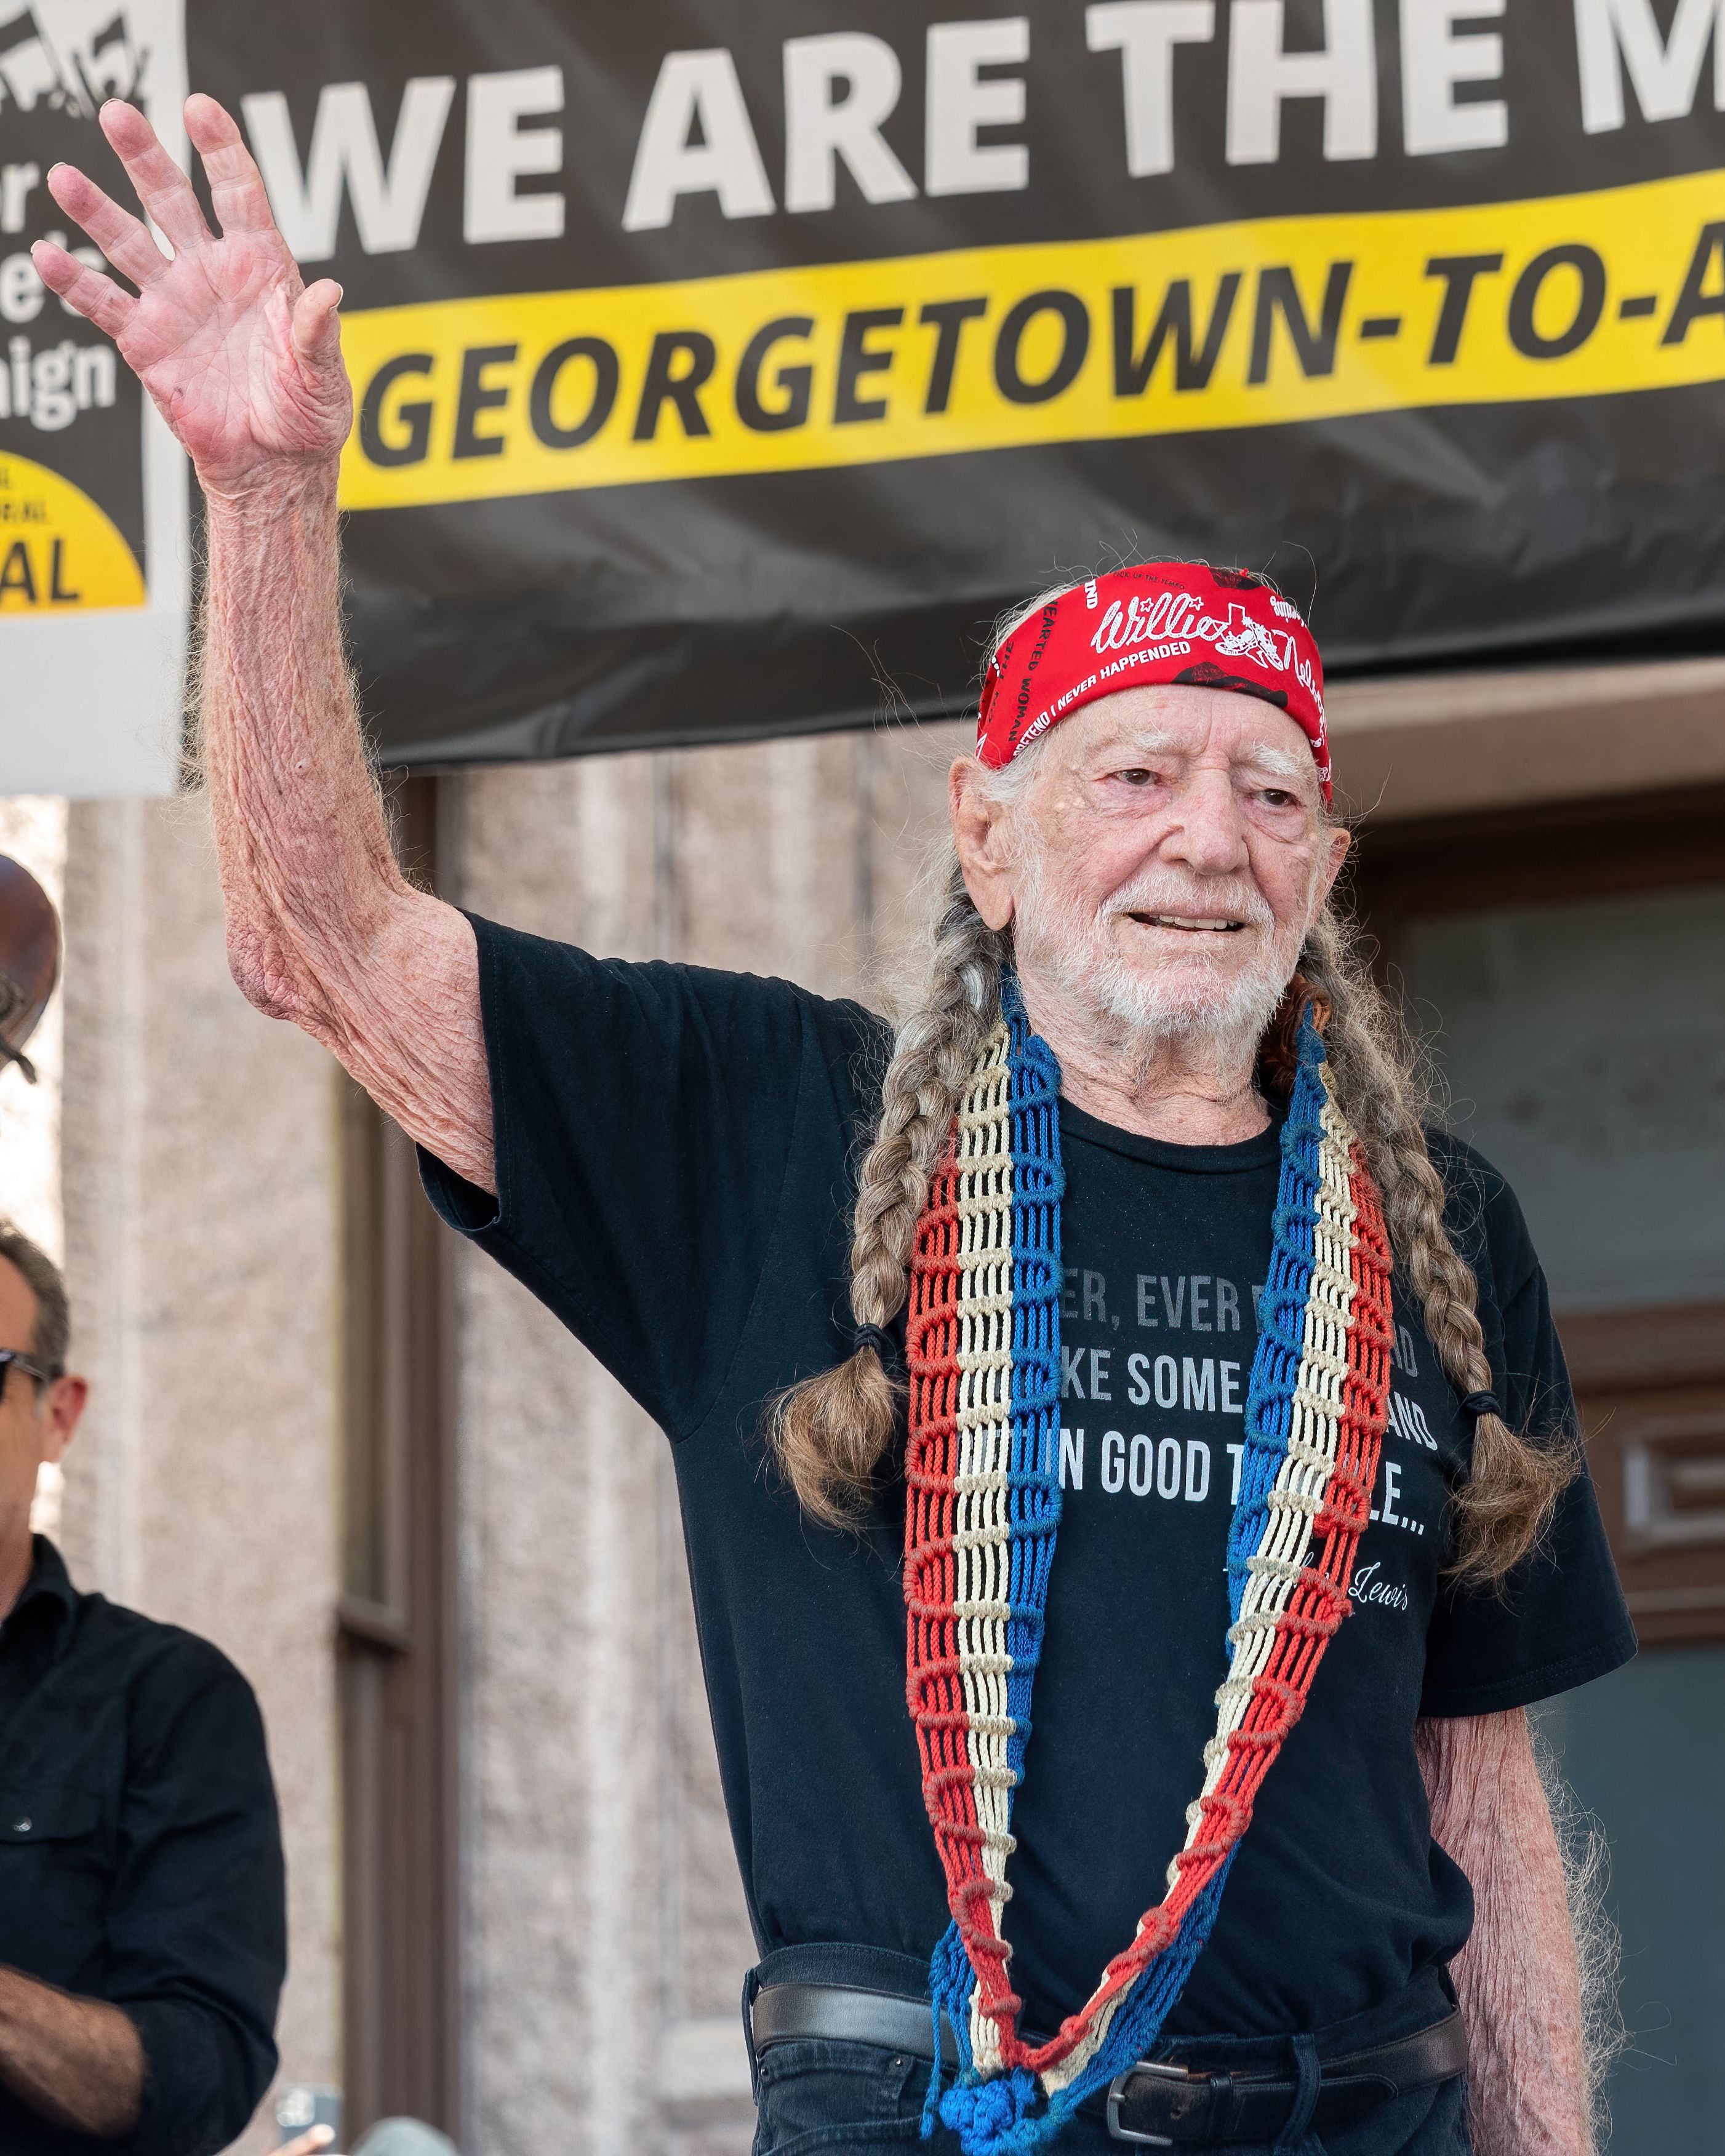 Willie Nelson at a rally to support voting rights at the Texas State Capitol on July 31, 2021, in Austin, Texas | Source: Getty Images